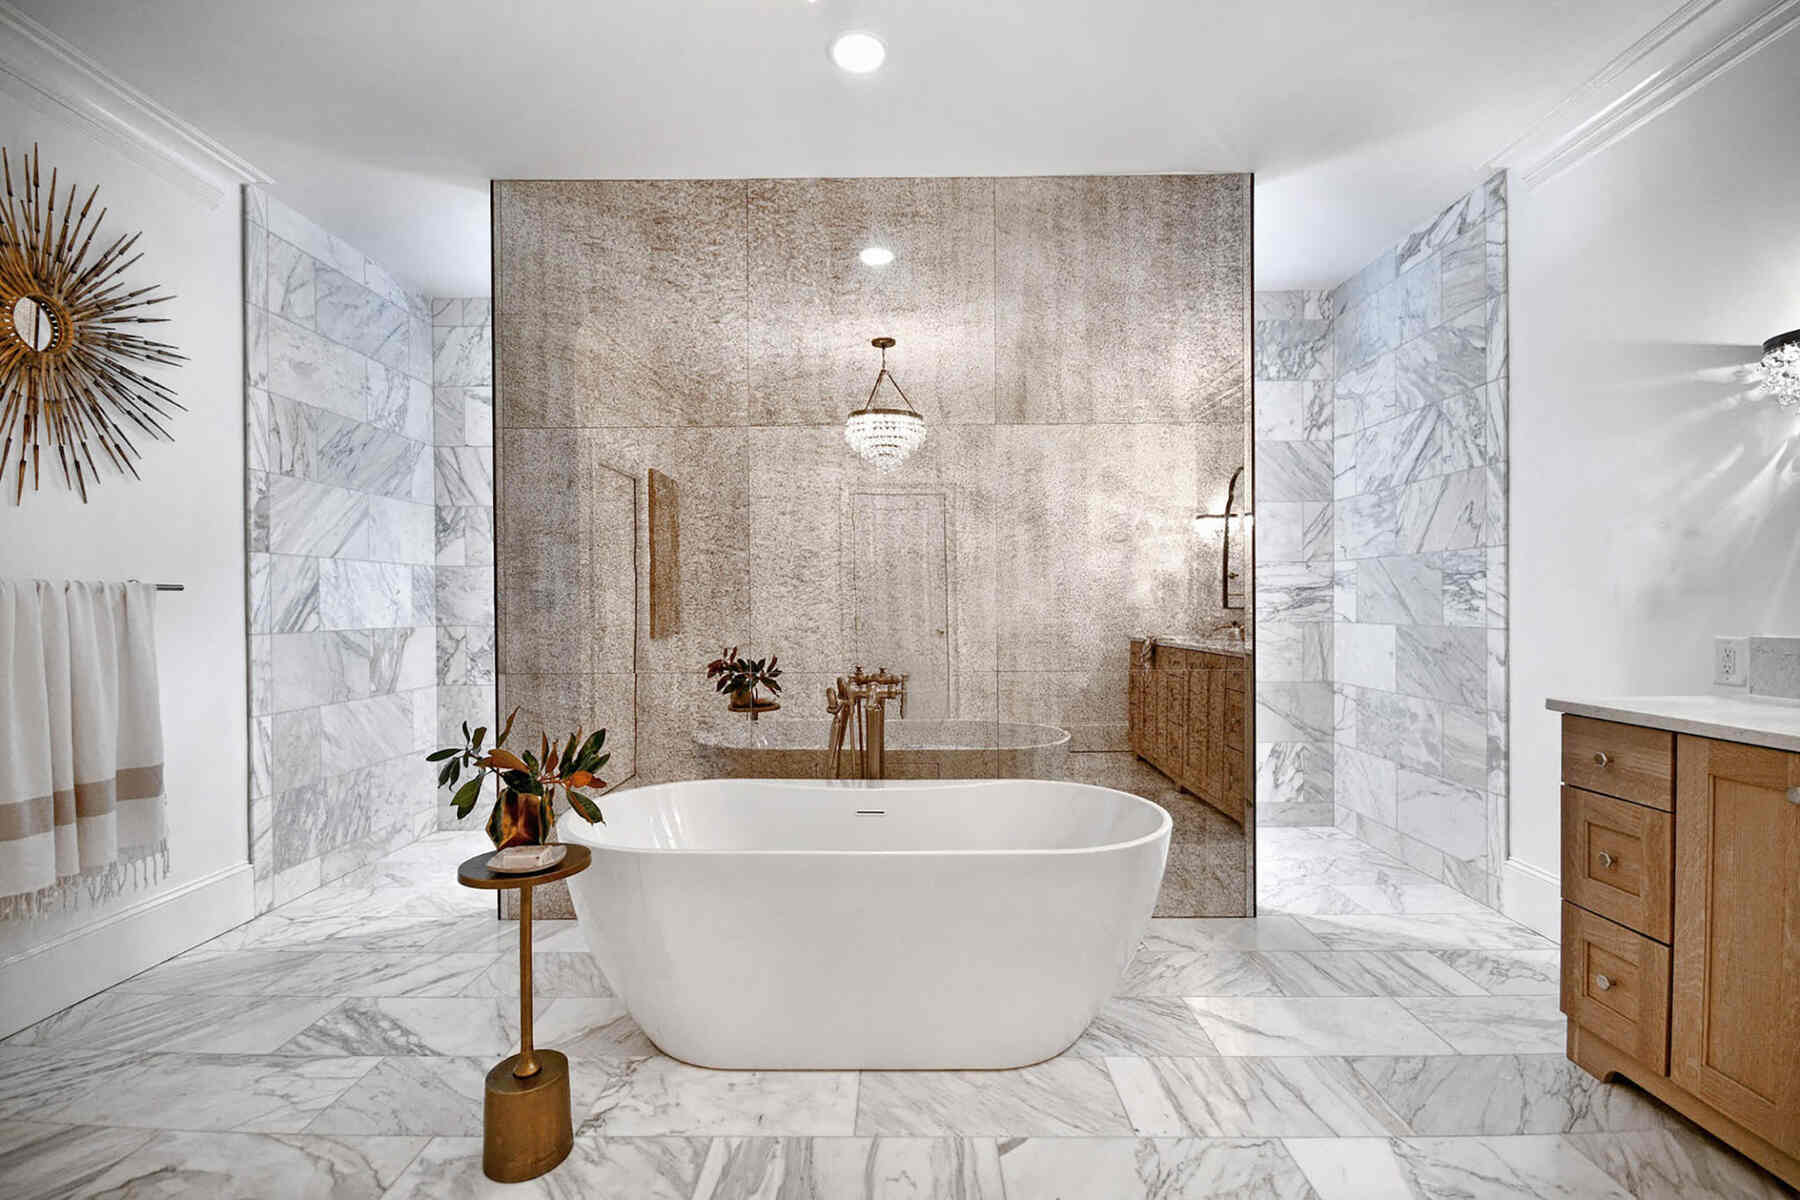 Bathtub placed on the center of a bathroom with multiple textured walls and marble flooring